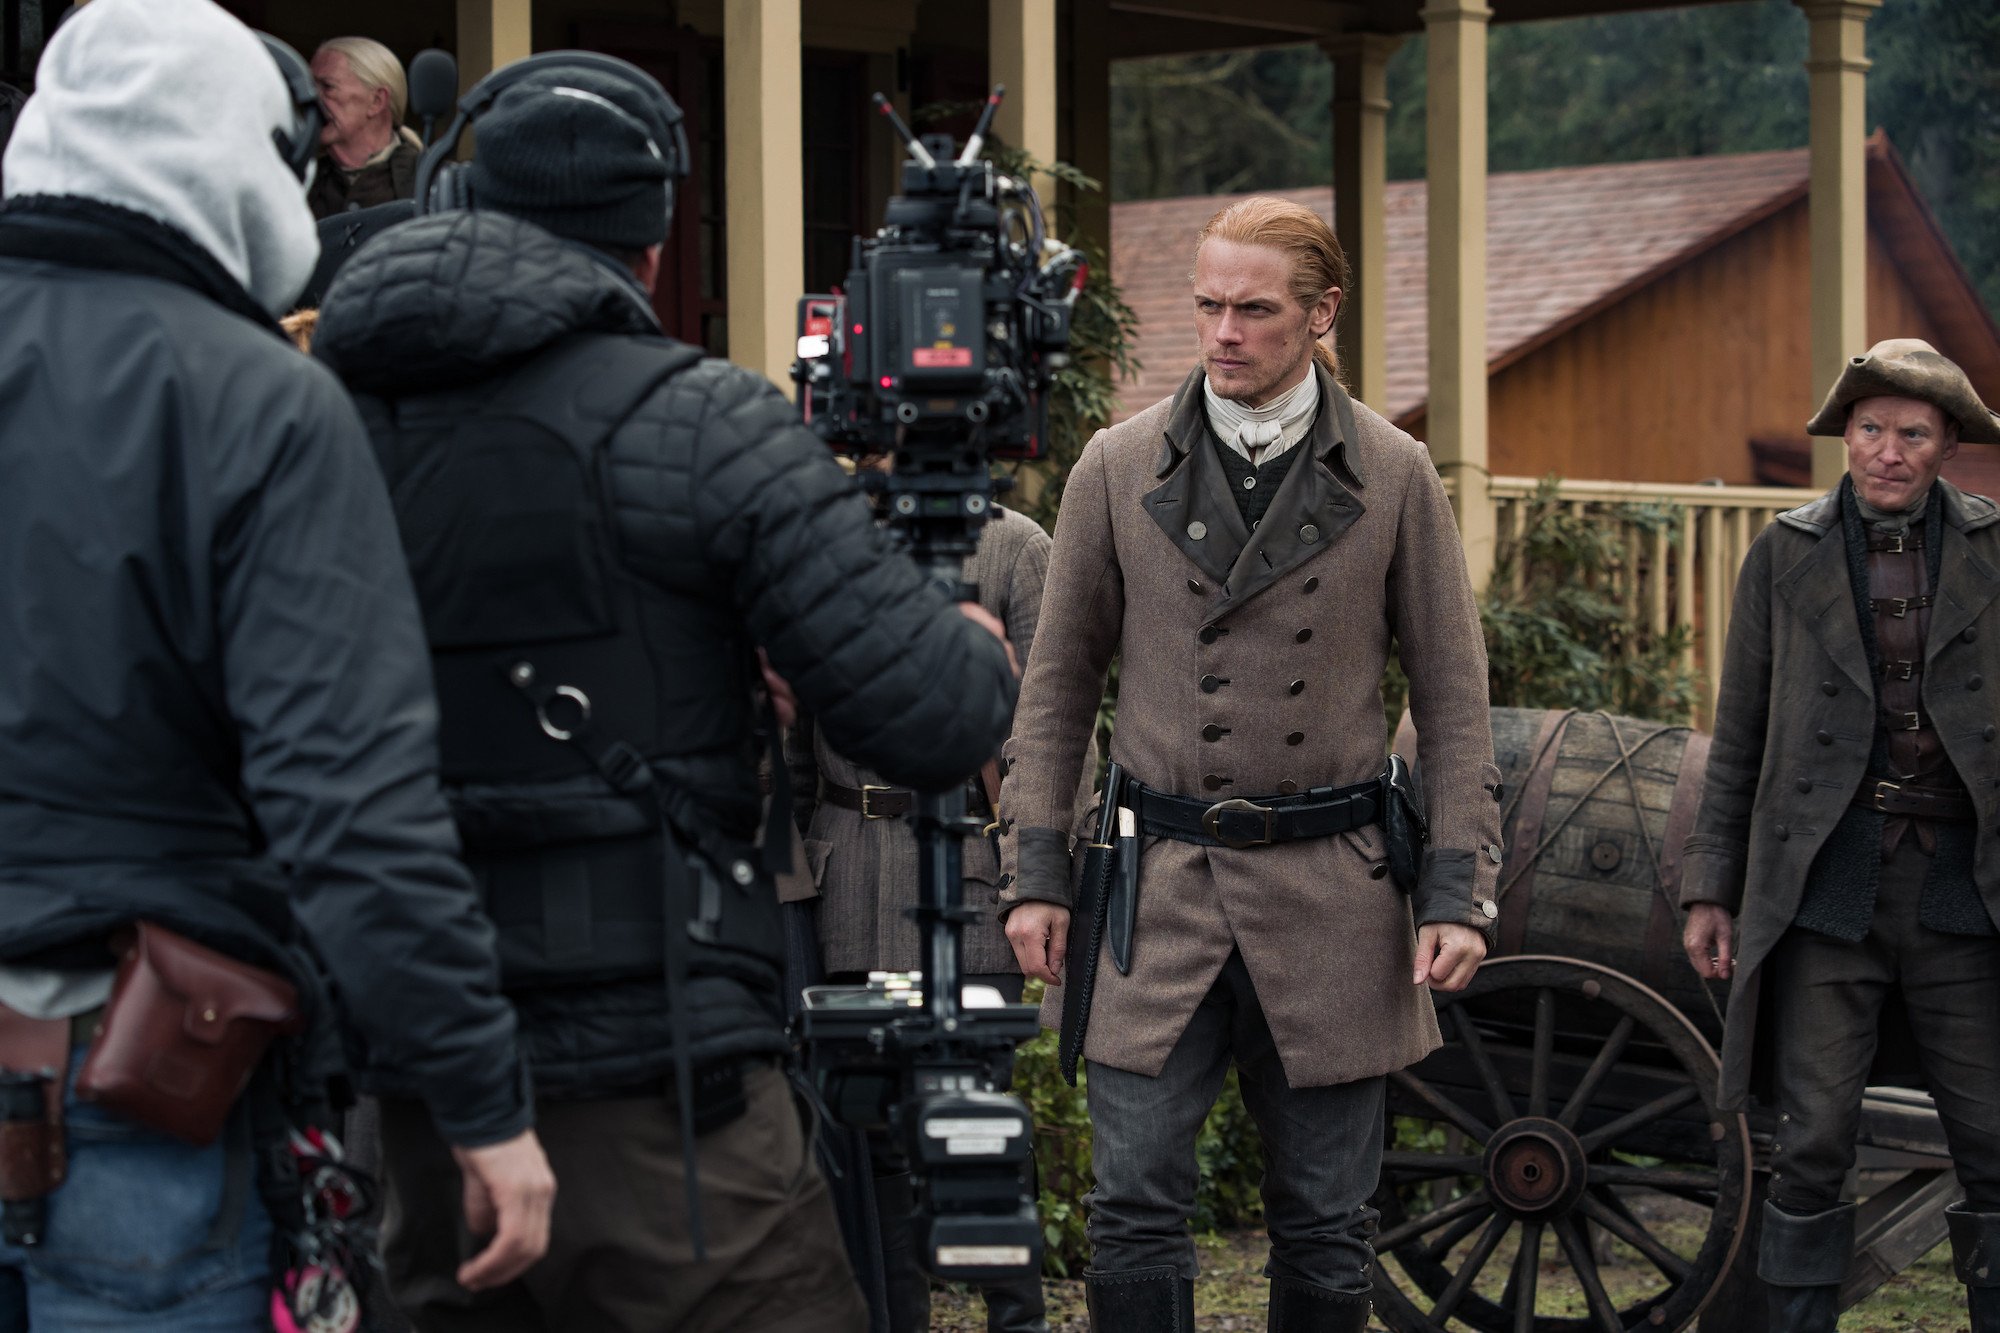 'Outlander': Sma Heughan stands in front of the camera crew in costume